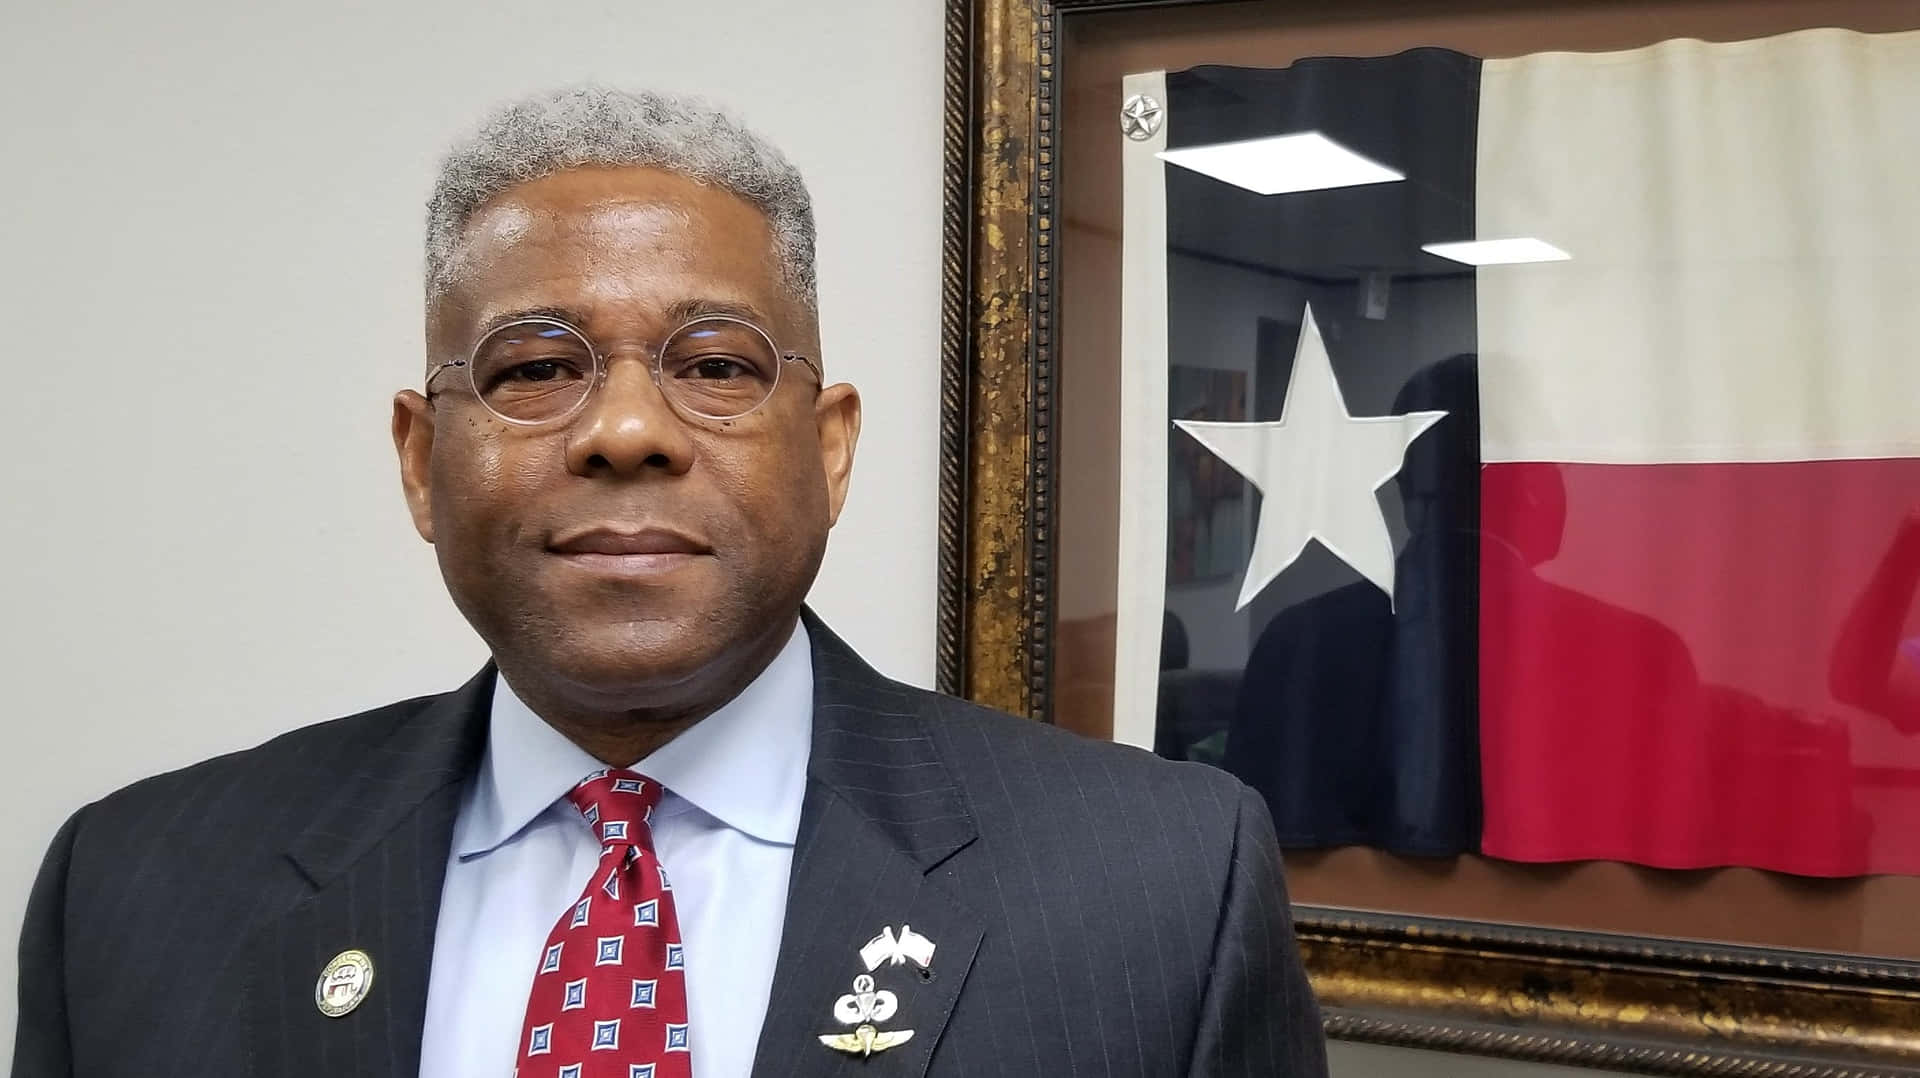 Allen West With The Texas State Flag Wallpaper